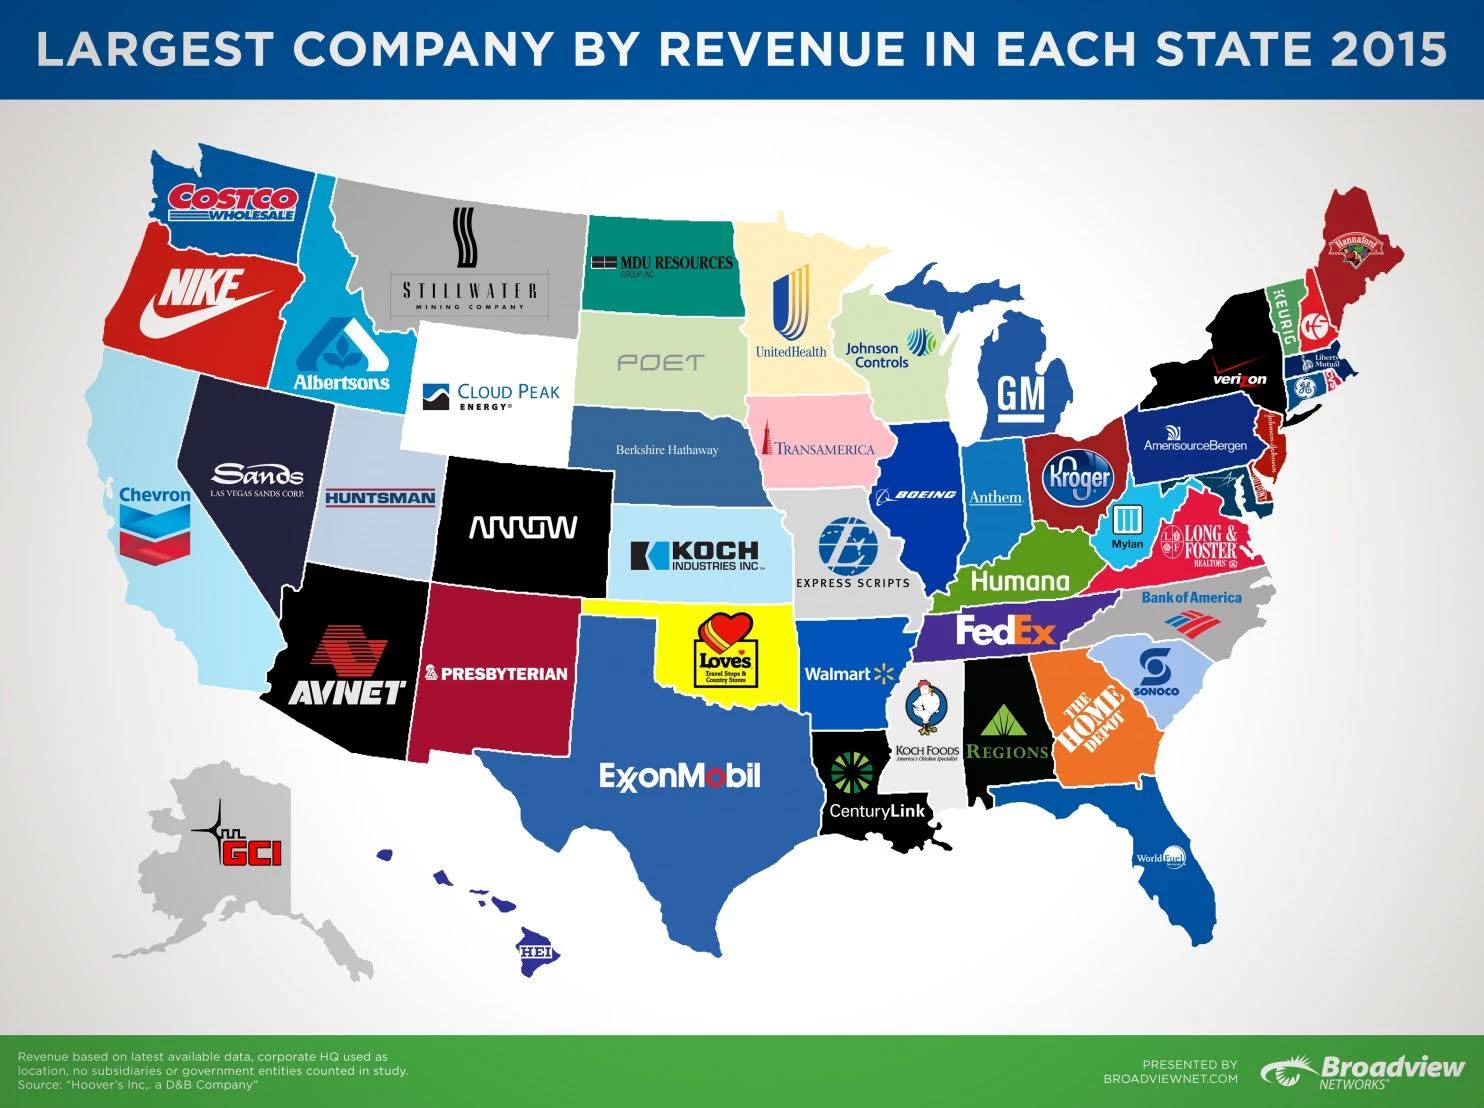 http://www.ritholtz.com/blog/2015/06/largest-company-by-revenue-in-each-state/